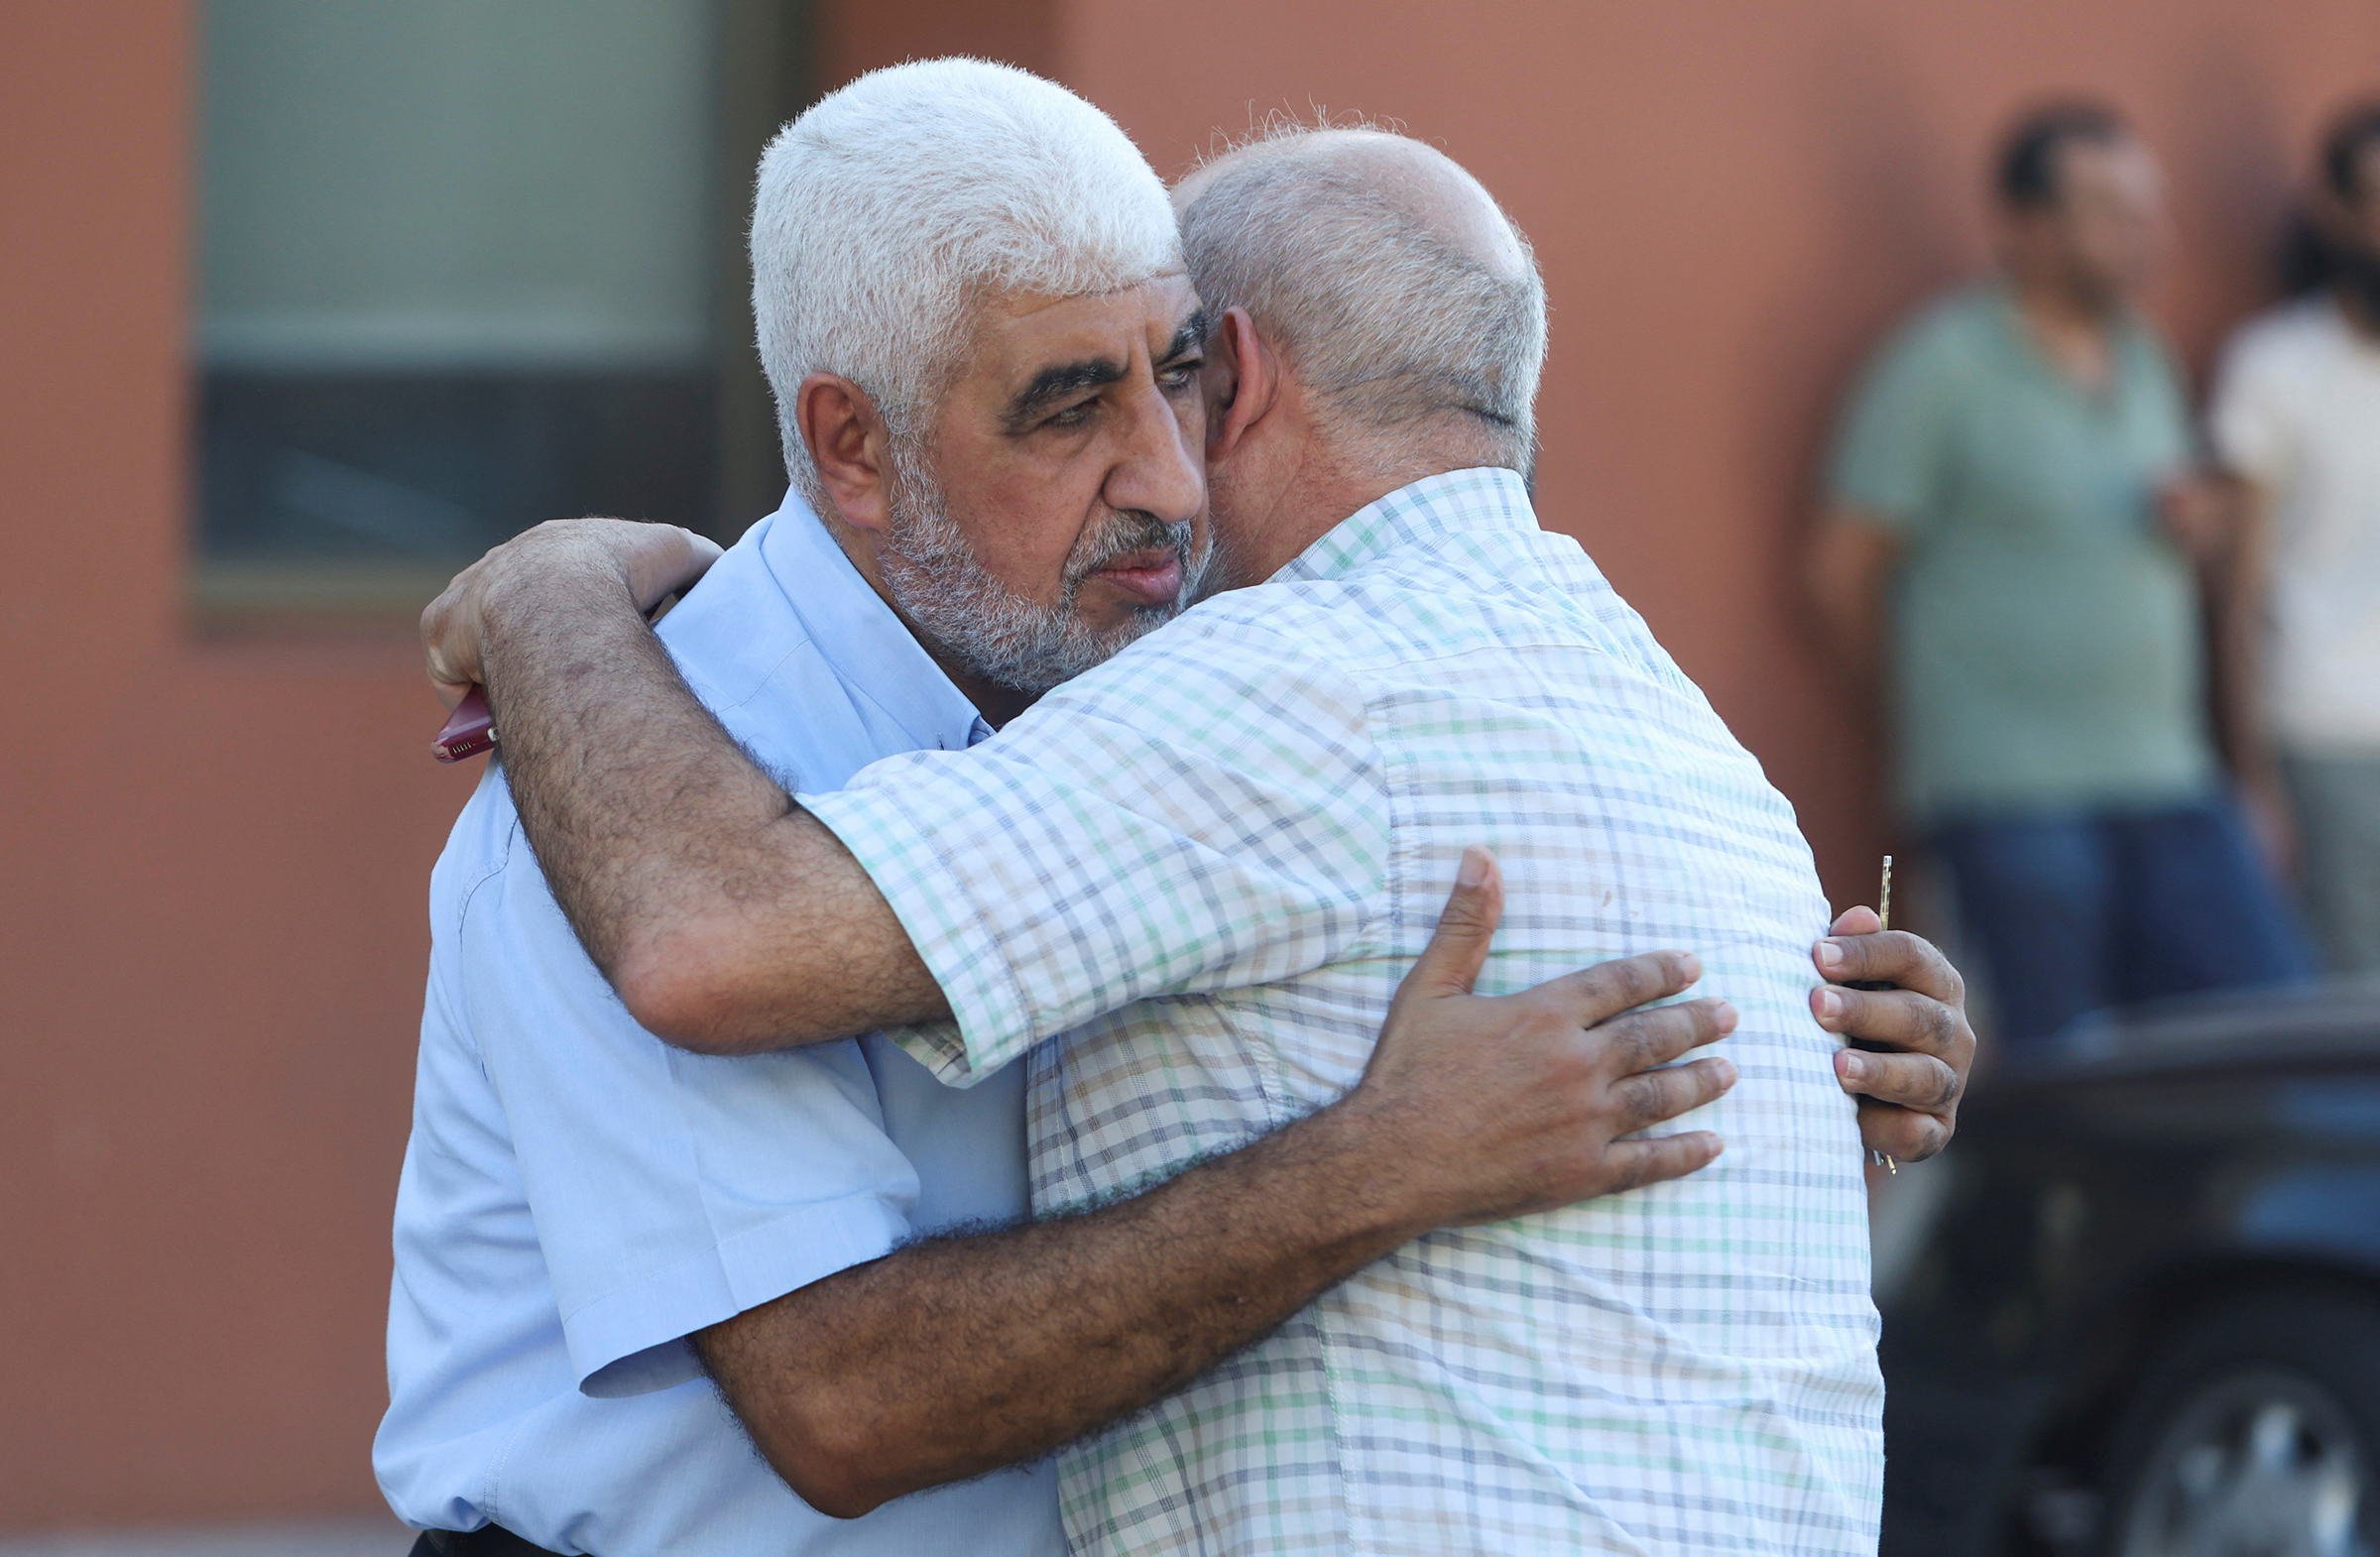 Mohammed Sariyeh hugs a man as he accepts condolences for the death of his brother Saleh, his wife, and two of his daughters who died during a powerful storm in Libya, in Sidon, on Sept. 14. (Aziz Taher—Reuters)